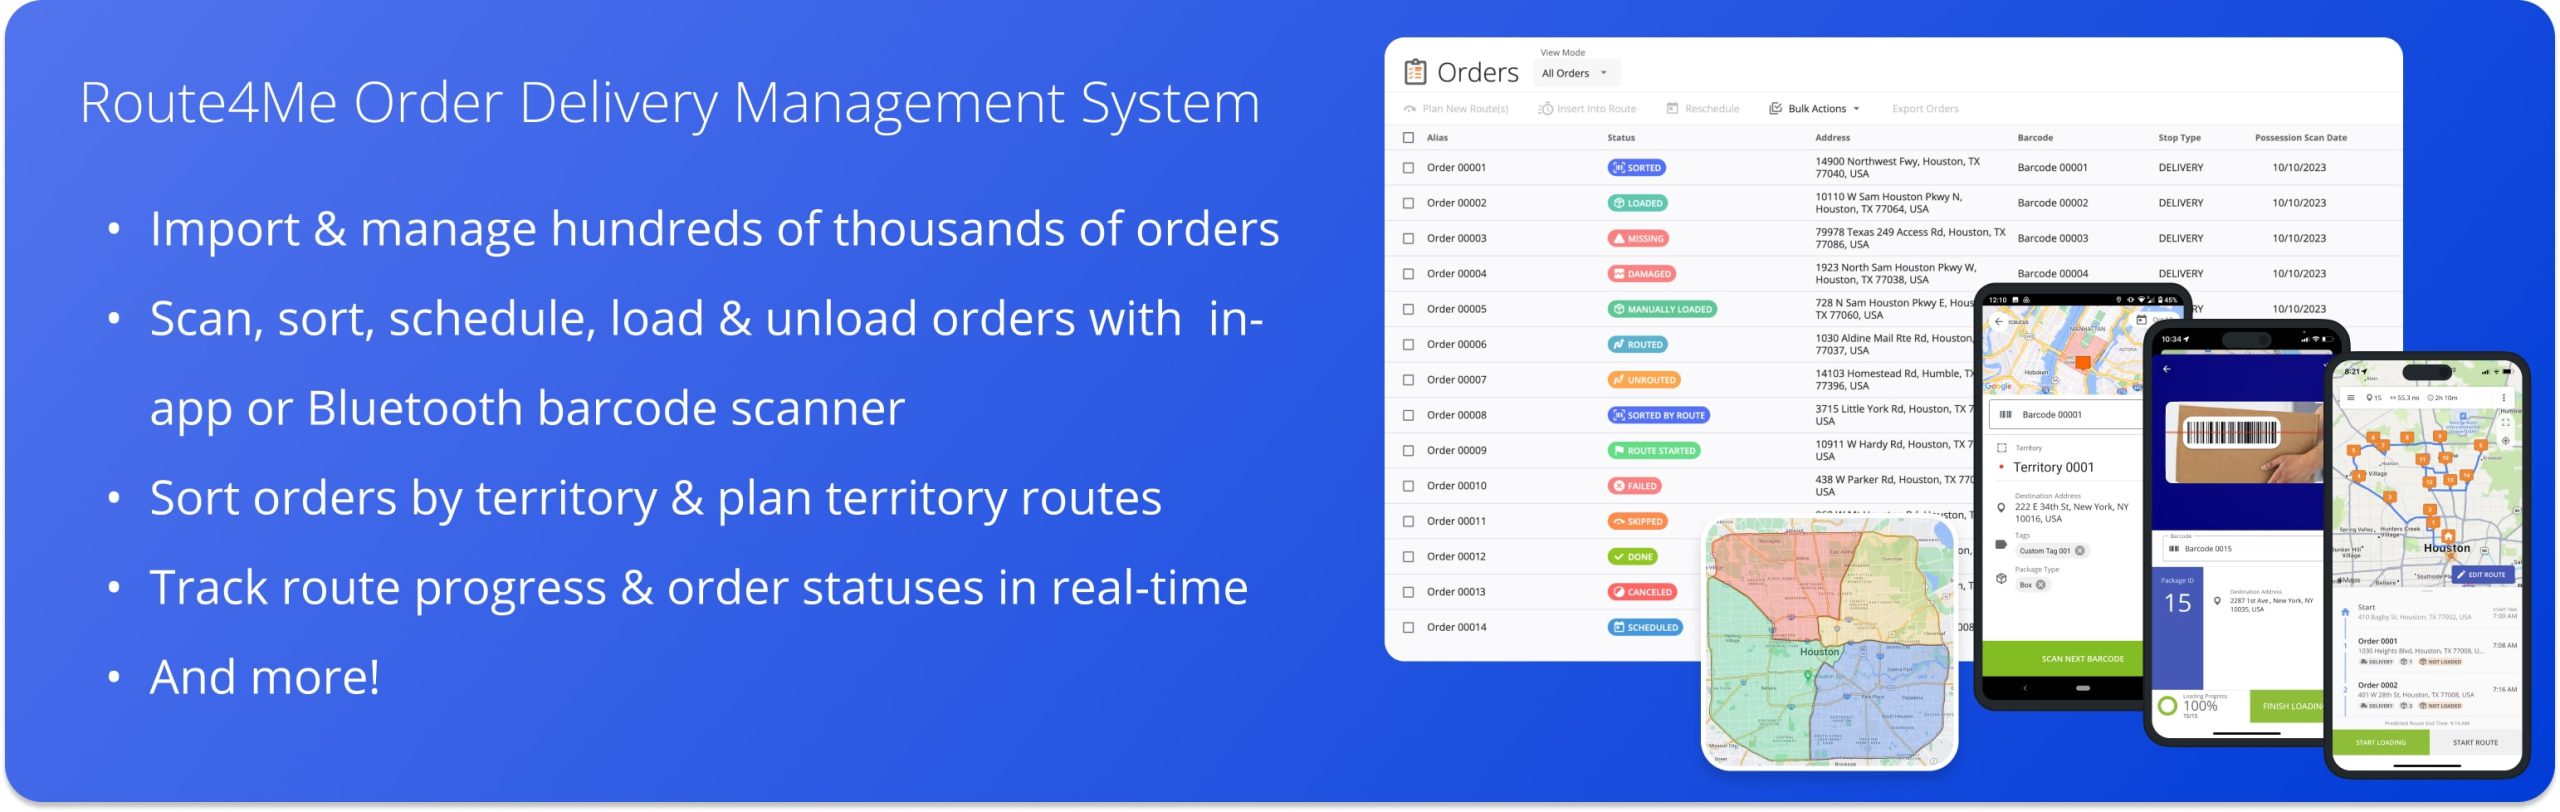 Route4Me Delivery Management System: Import orders from CRM or other systems, scan and sort orders, insert orders into last mile routes, deliver orders, and more.